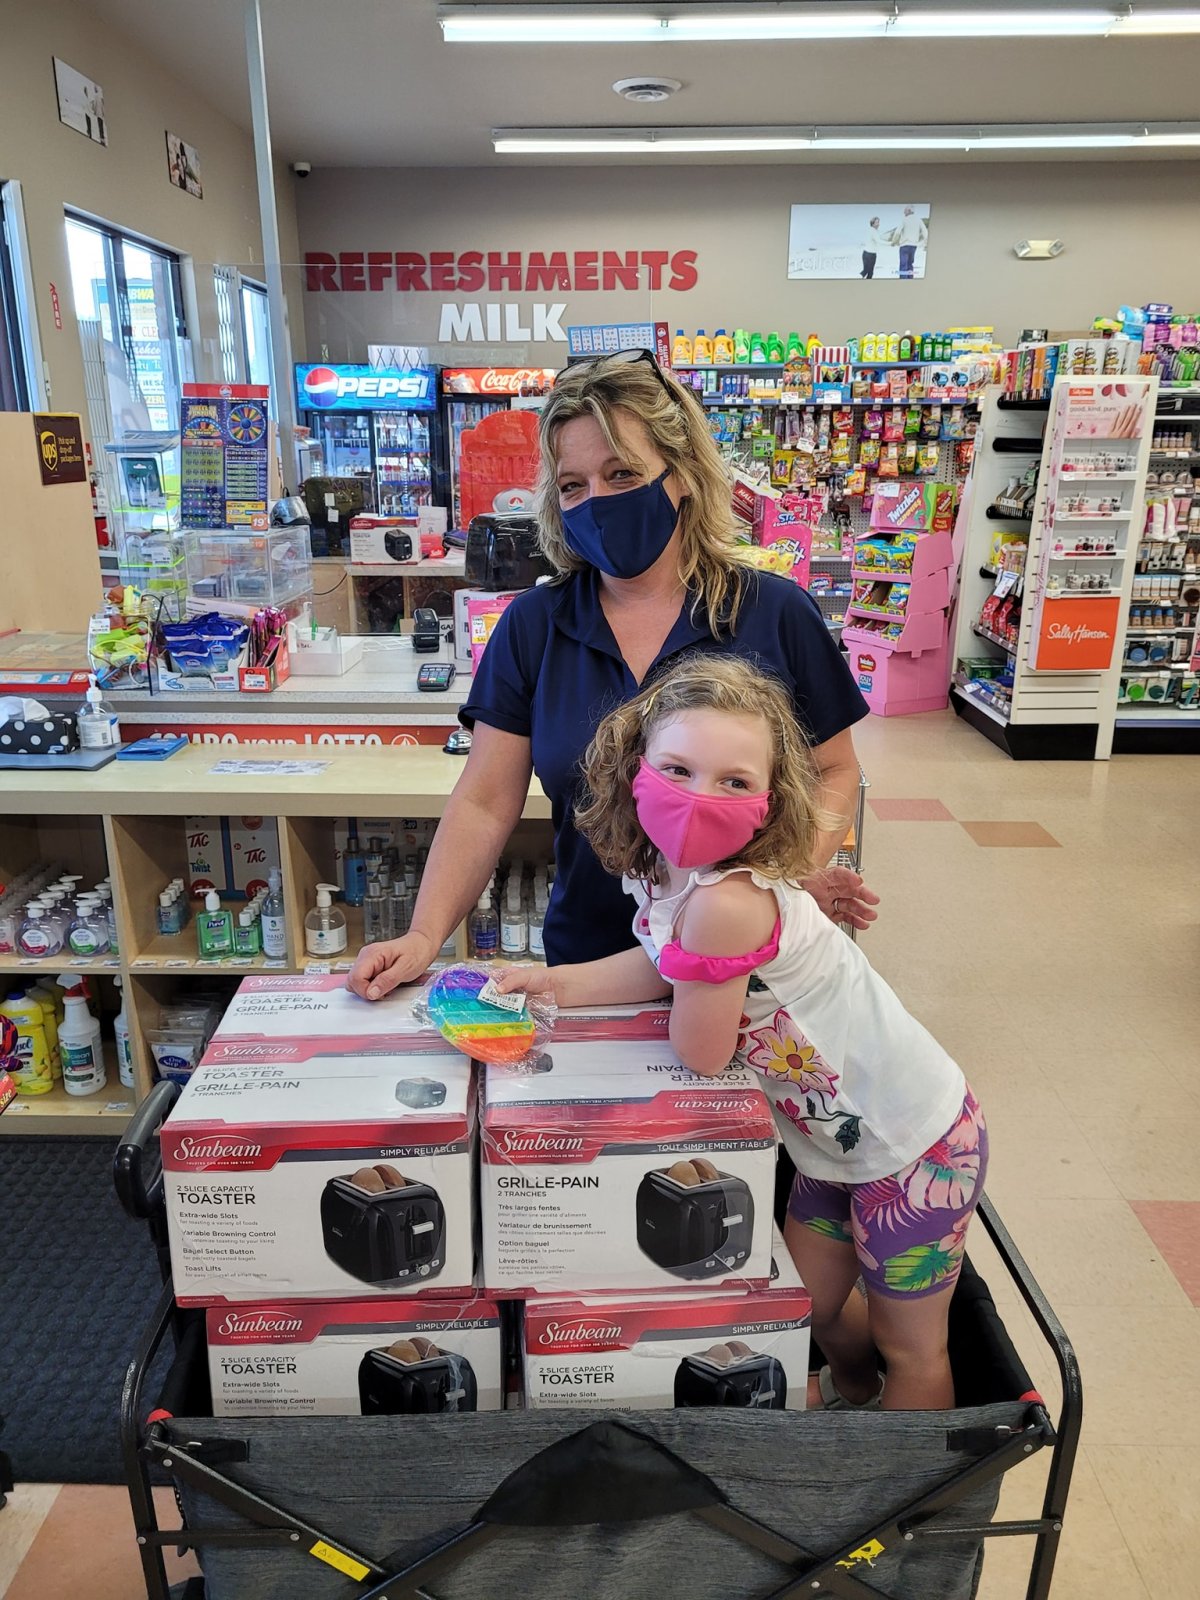 Waverley Road Pharmachoice store manager Betty Swaffer with the daughter of Nora Lindner, who bought 12 toasters to donate.